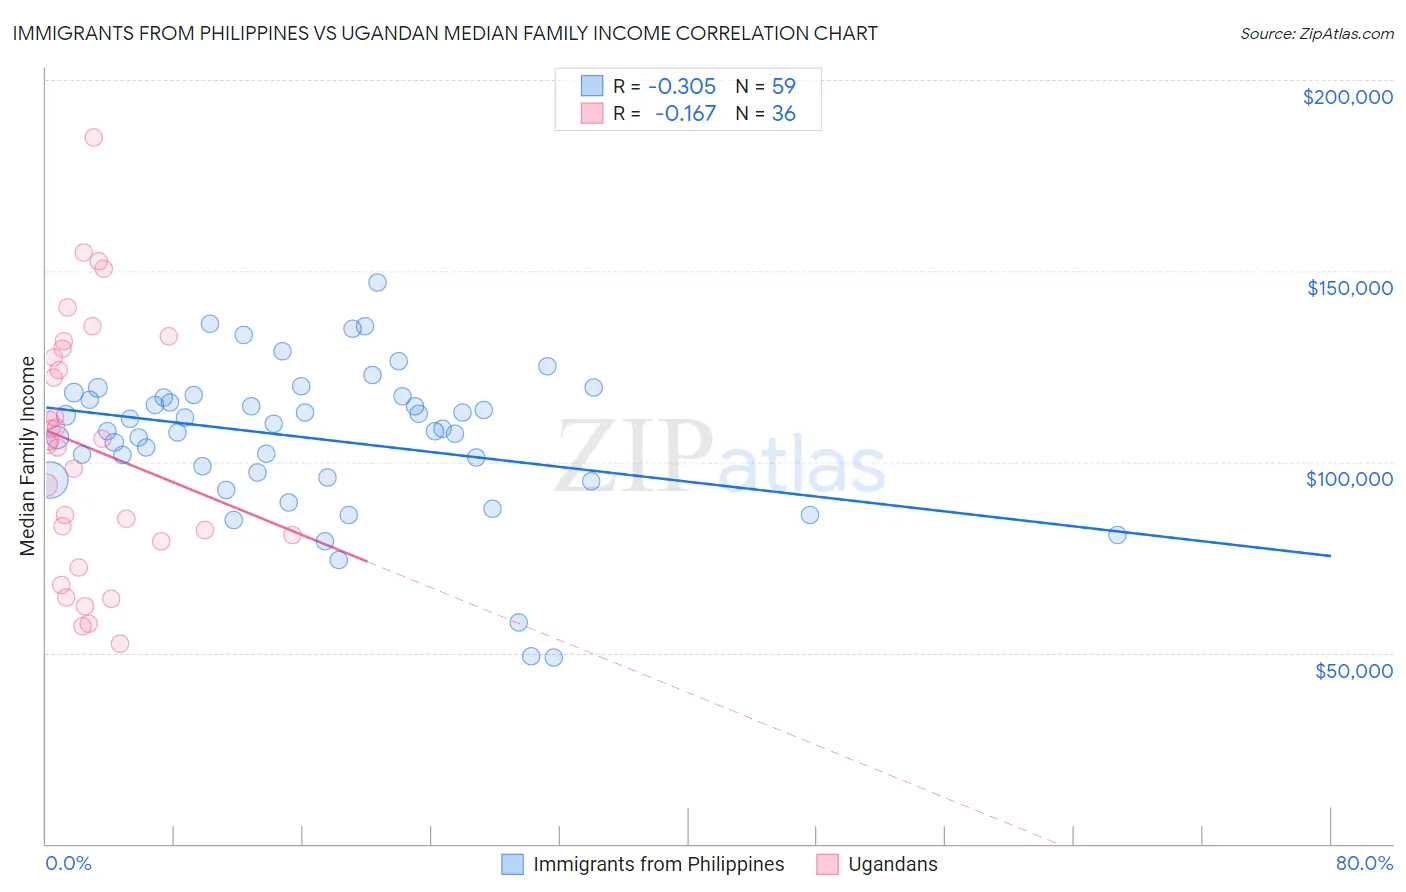 Immigrants from Philippines vs Ugandan Median Family Income